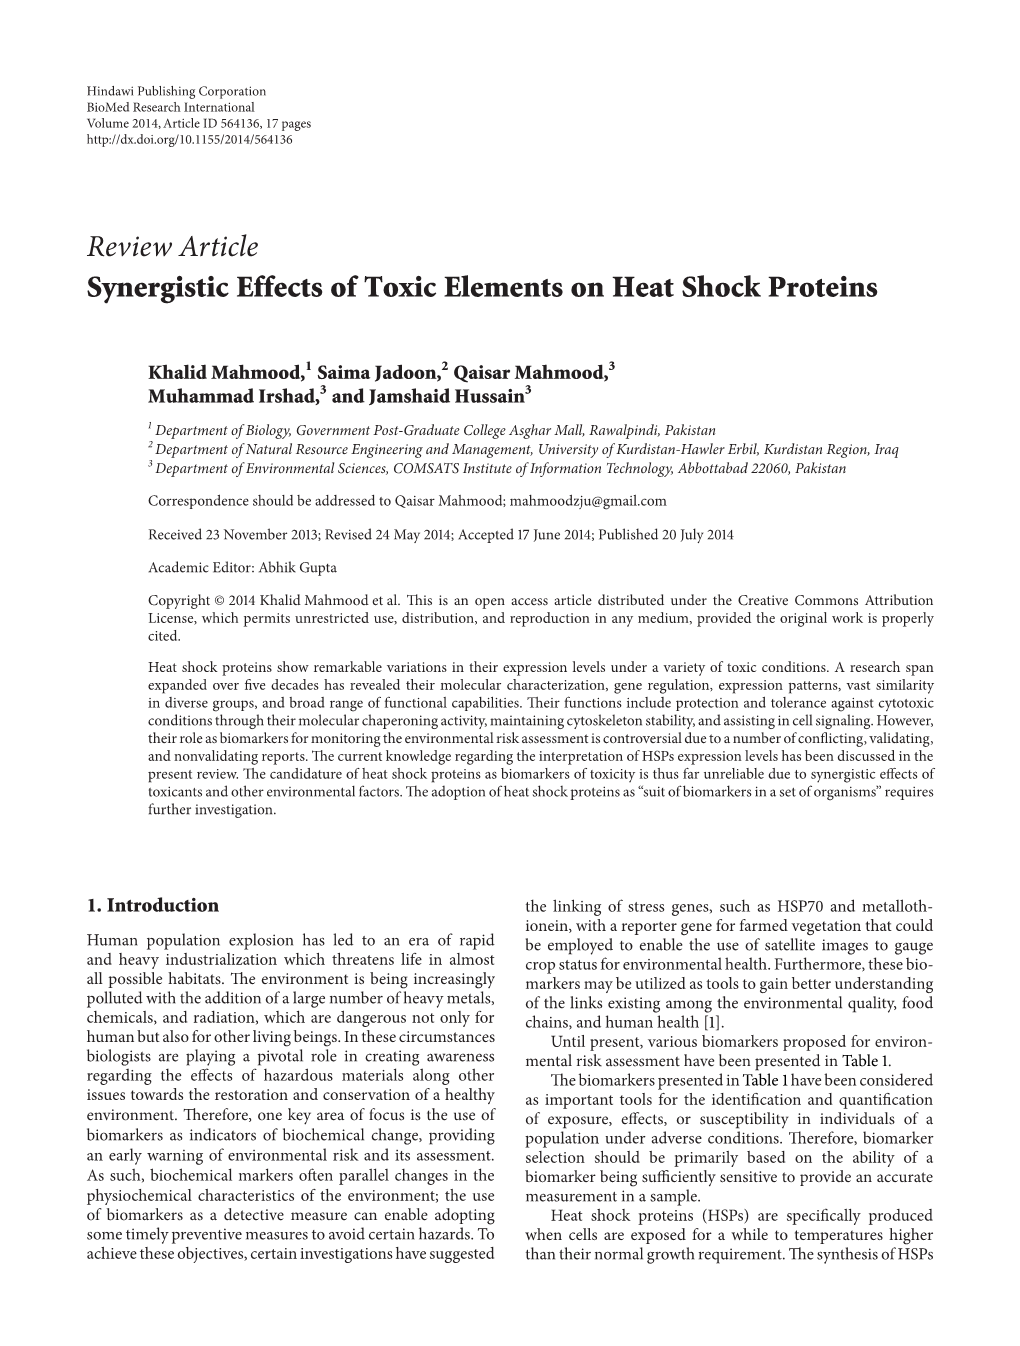 Synergistic Effects of Toxic Elements on Heat Shock Proteins